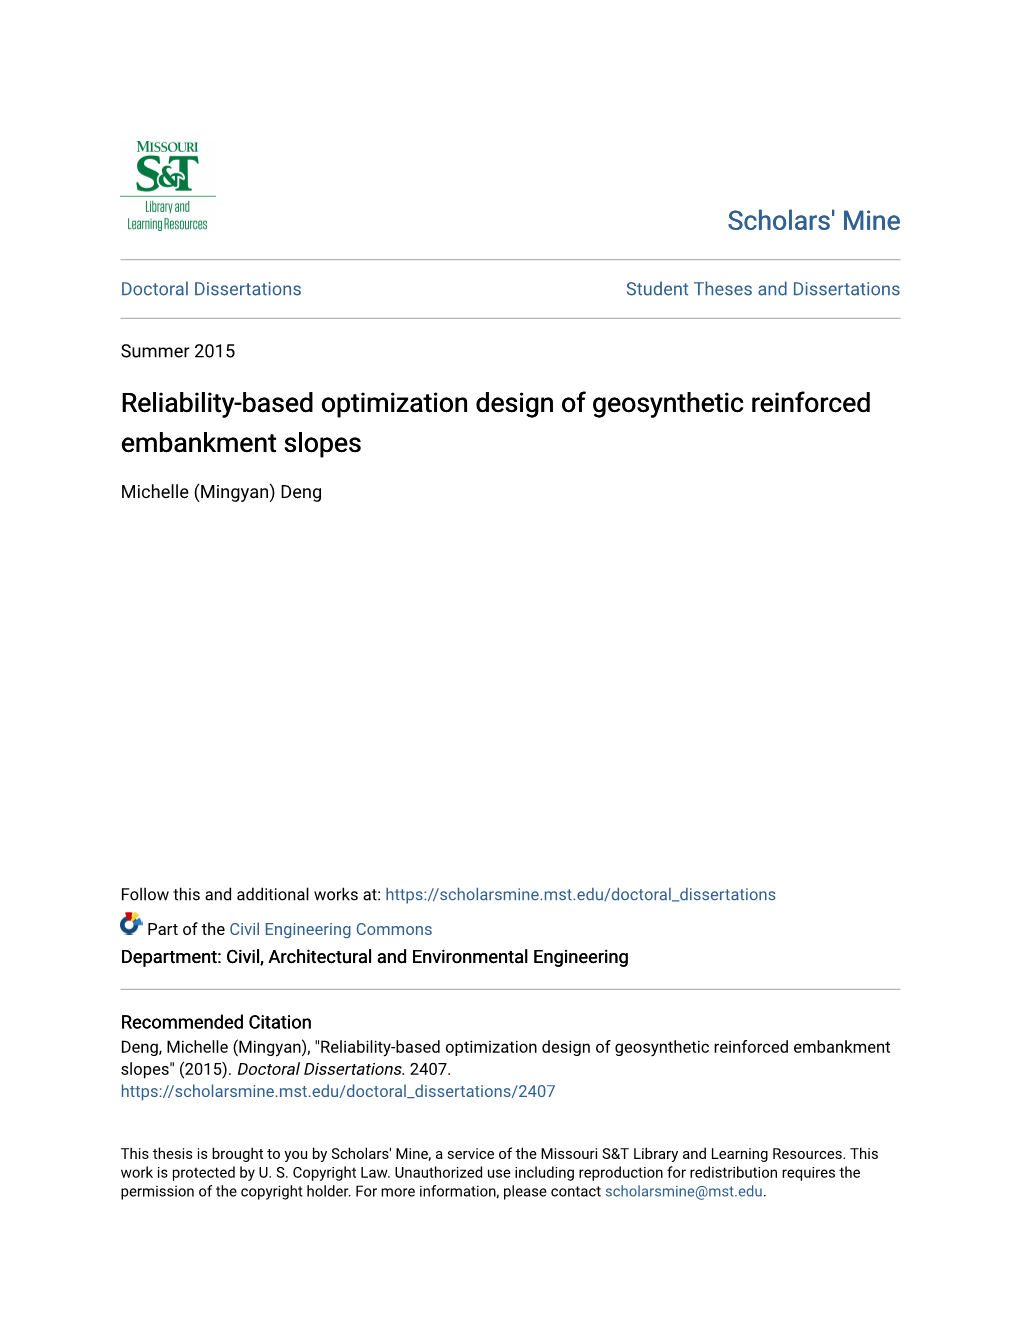 Reliability-Based Optimization Design of Geosynthetic Reinforced Embankment Slopes